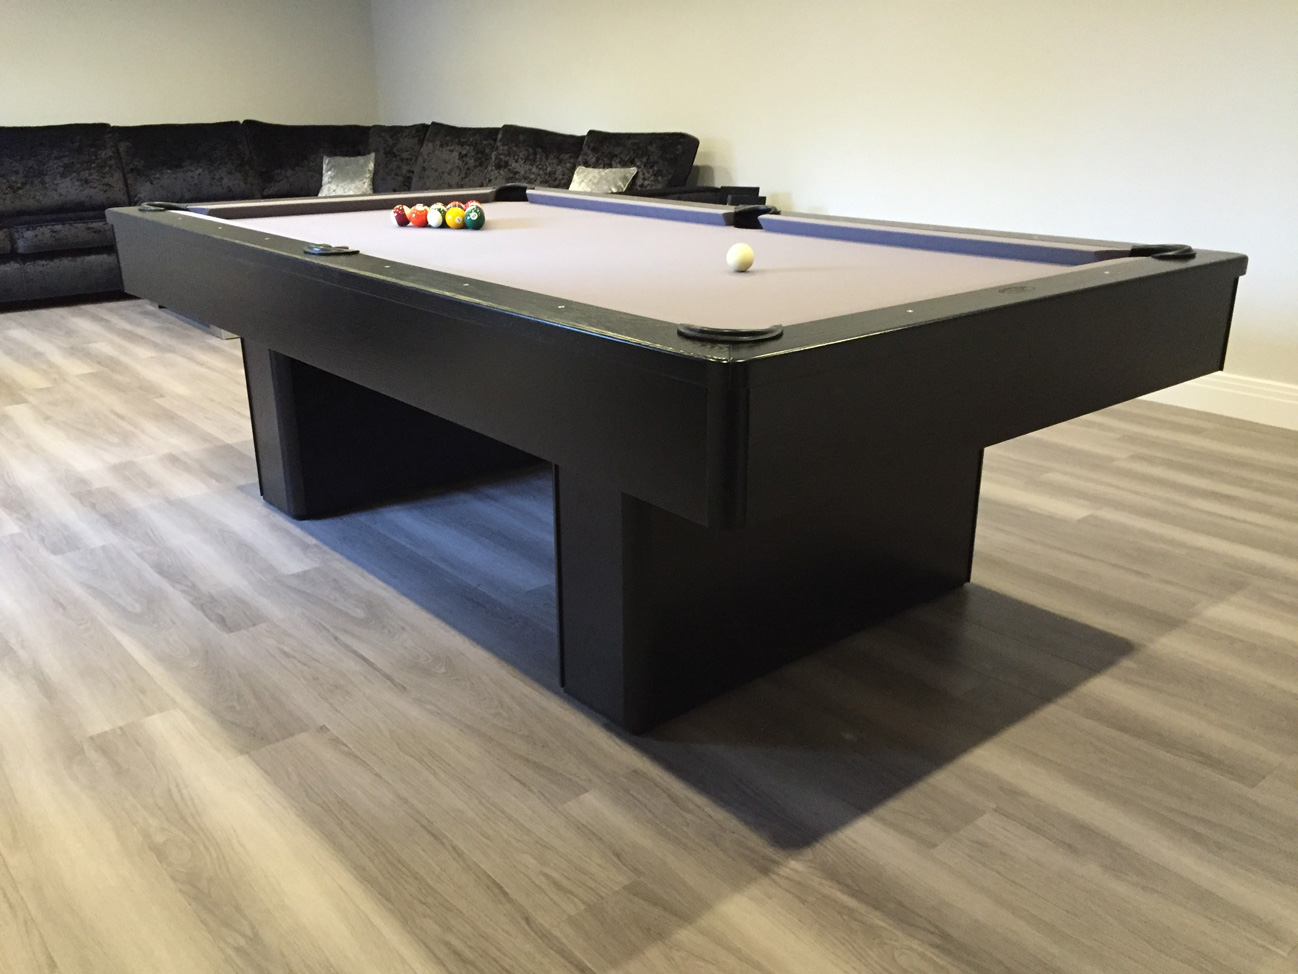 Olhausen Monarch Pool Table in Black (Grey Cloth) - American Pool Table